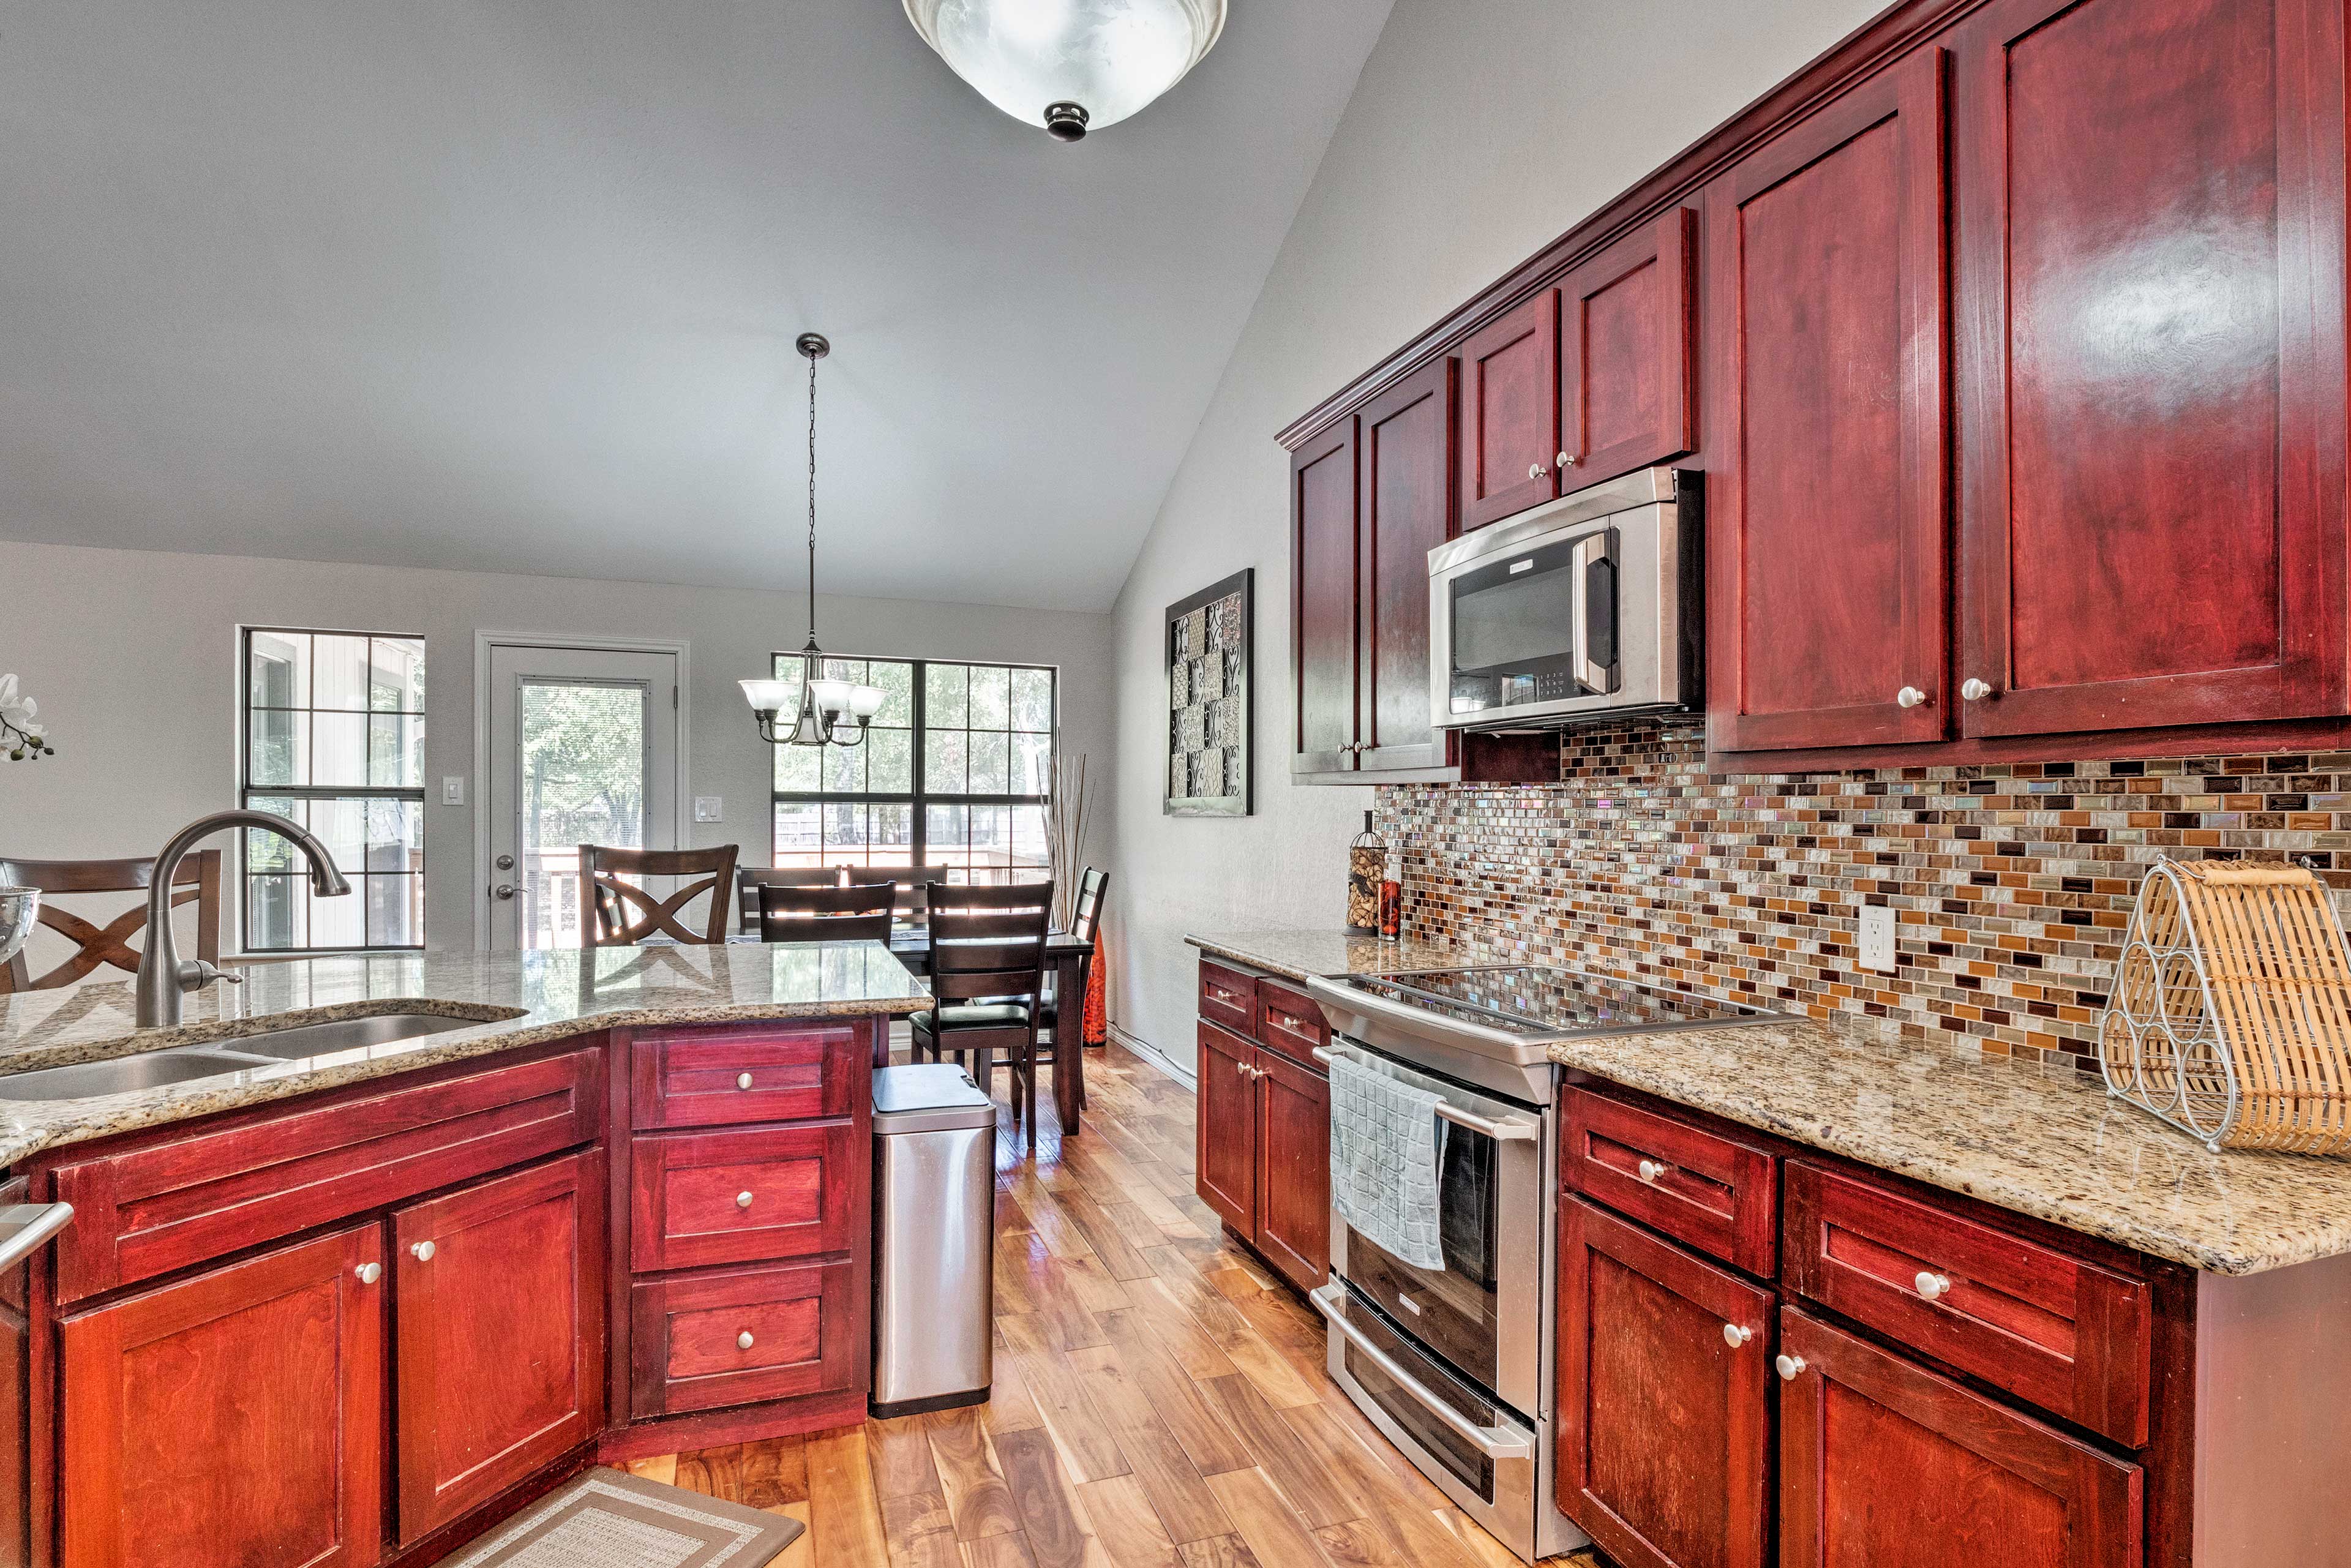 Granite counters and updated appliances are everything you need!